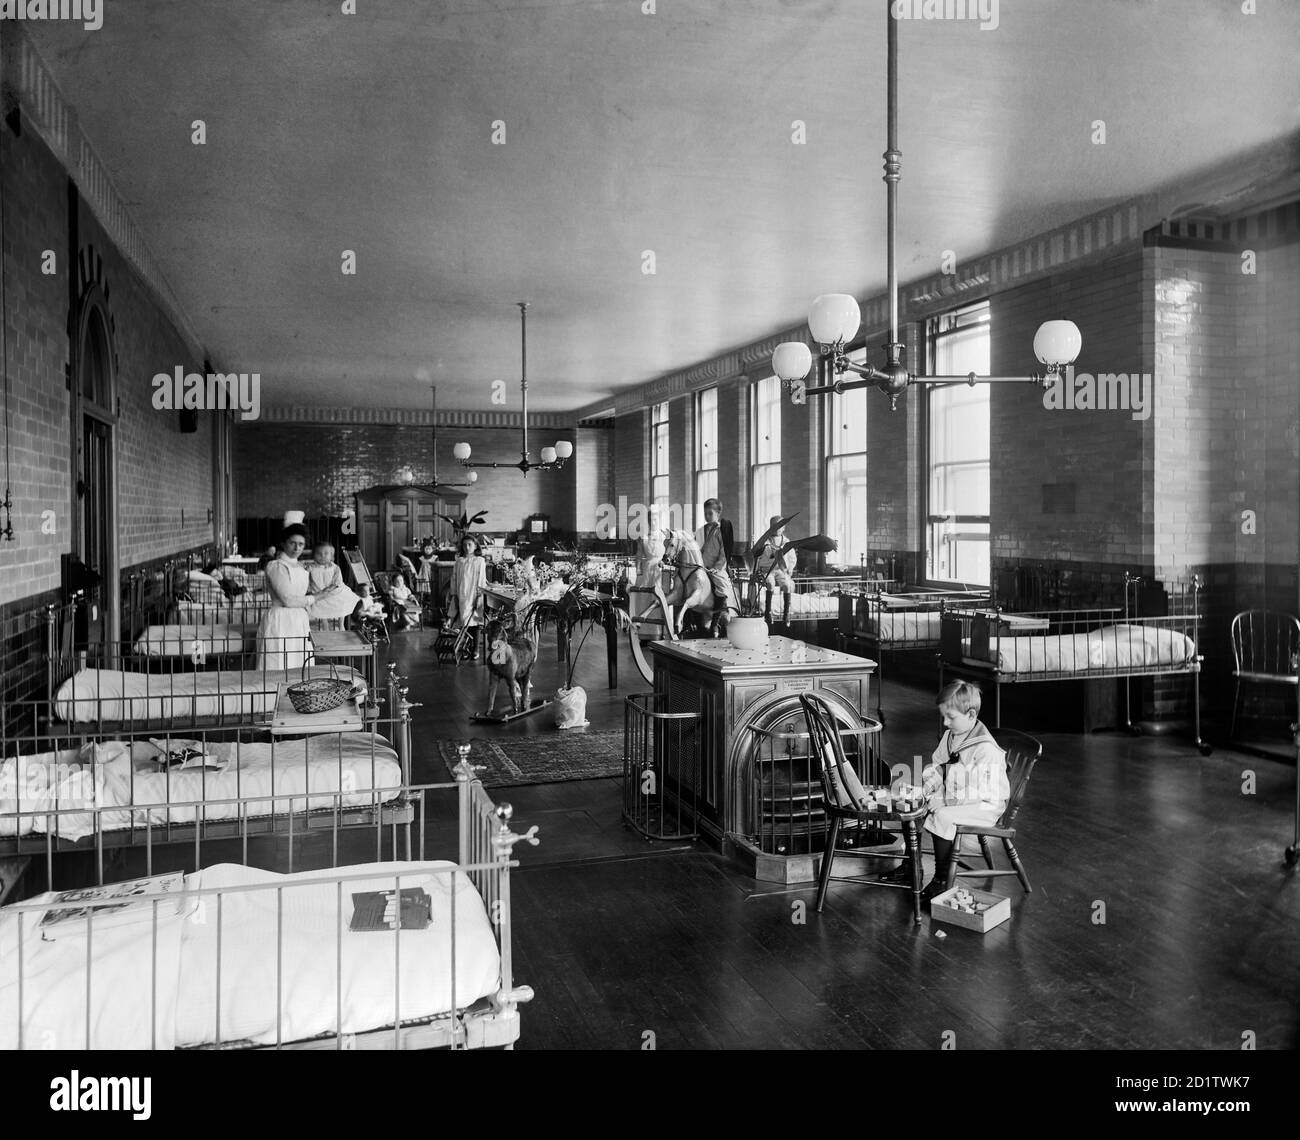 THE HOSPITAL FOR SICK CHILDREN, Great Ormond Street, London. Interior of the Clarence Ward showing nurses and children. The Hospital for Sick Children later became known as Great Ormond Street Hospital. Photographed for the secretary of the hospital by Bedford Lemere and Co. in May 1893. Stock Photo